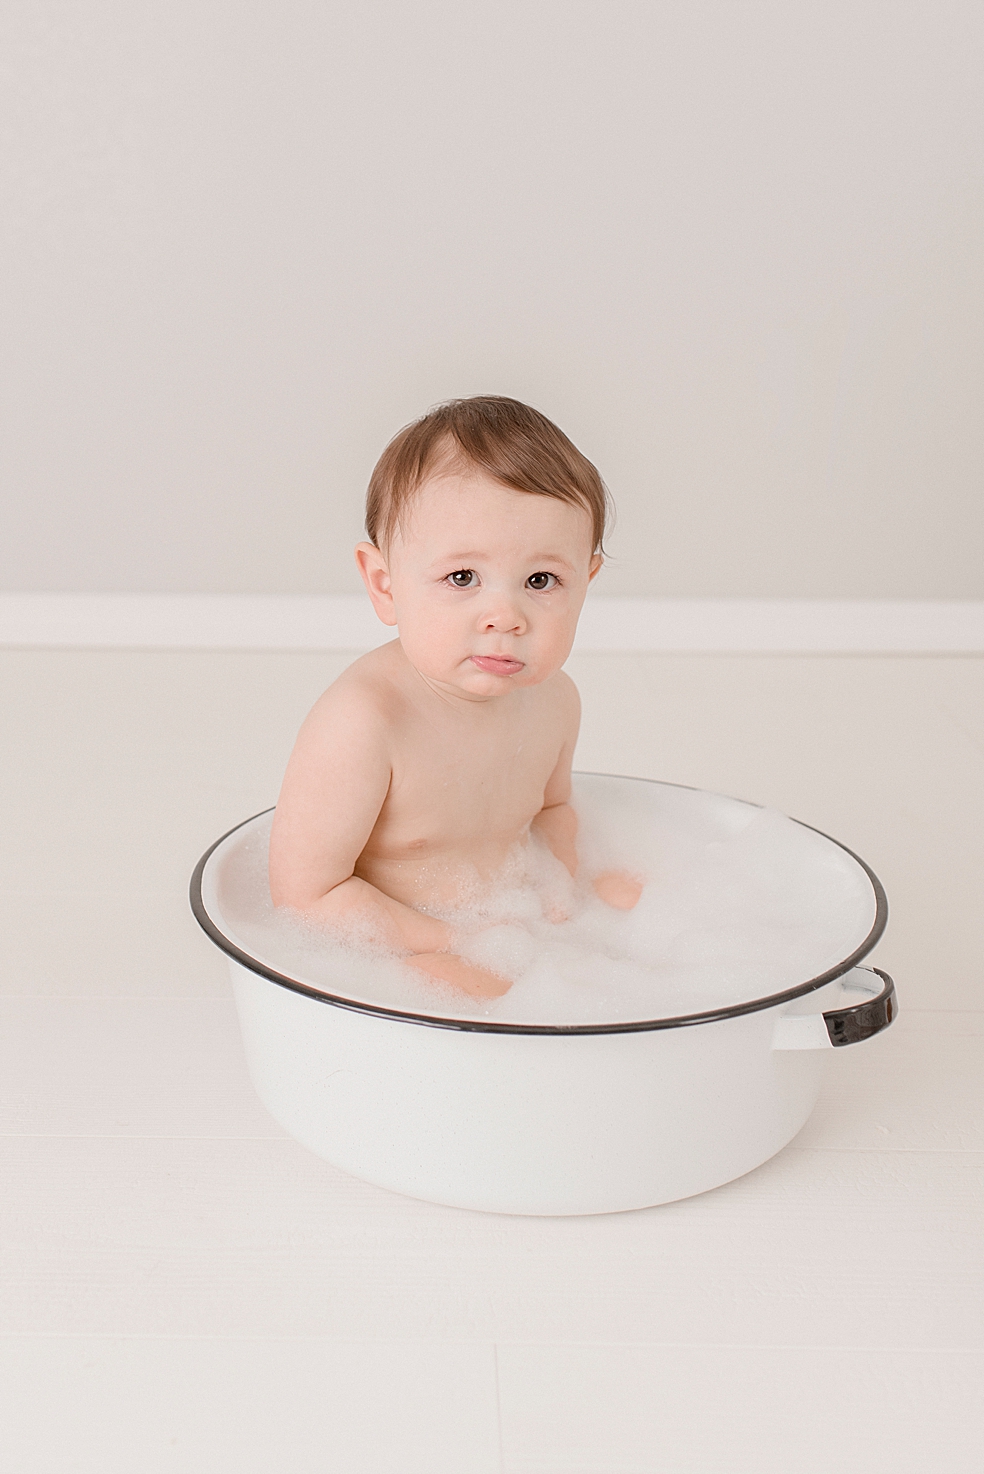 Toddler baby boy in bubbles | Photo by Huntsville Baby Photographer Jessica Lee 